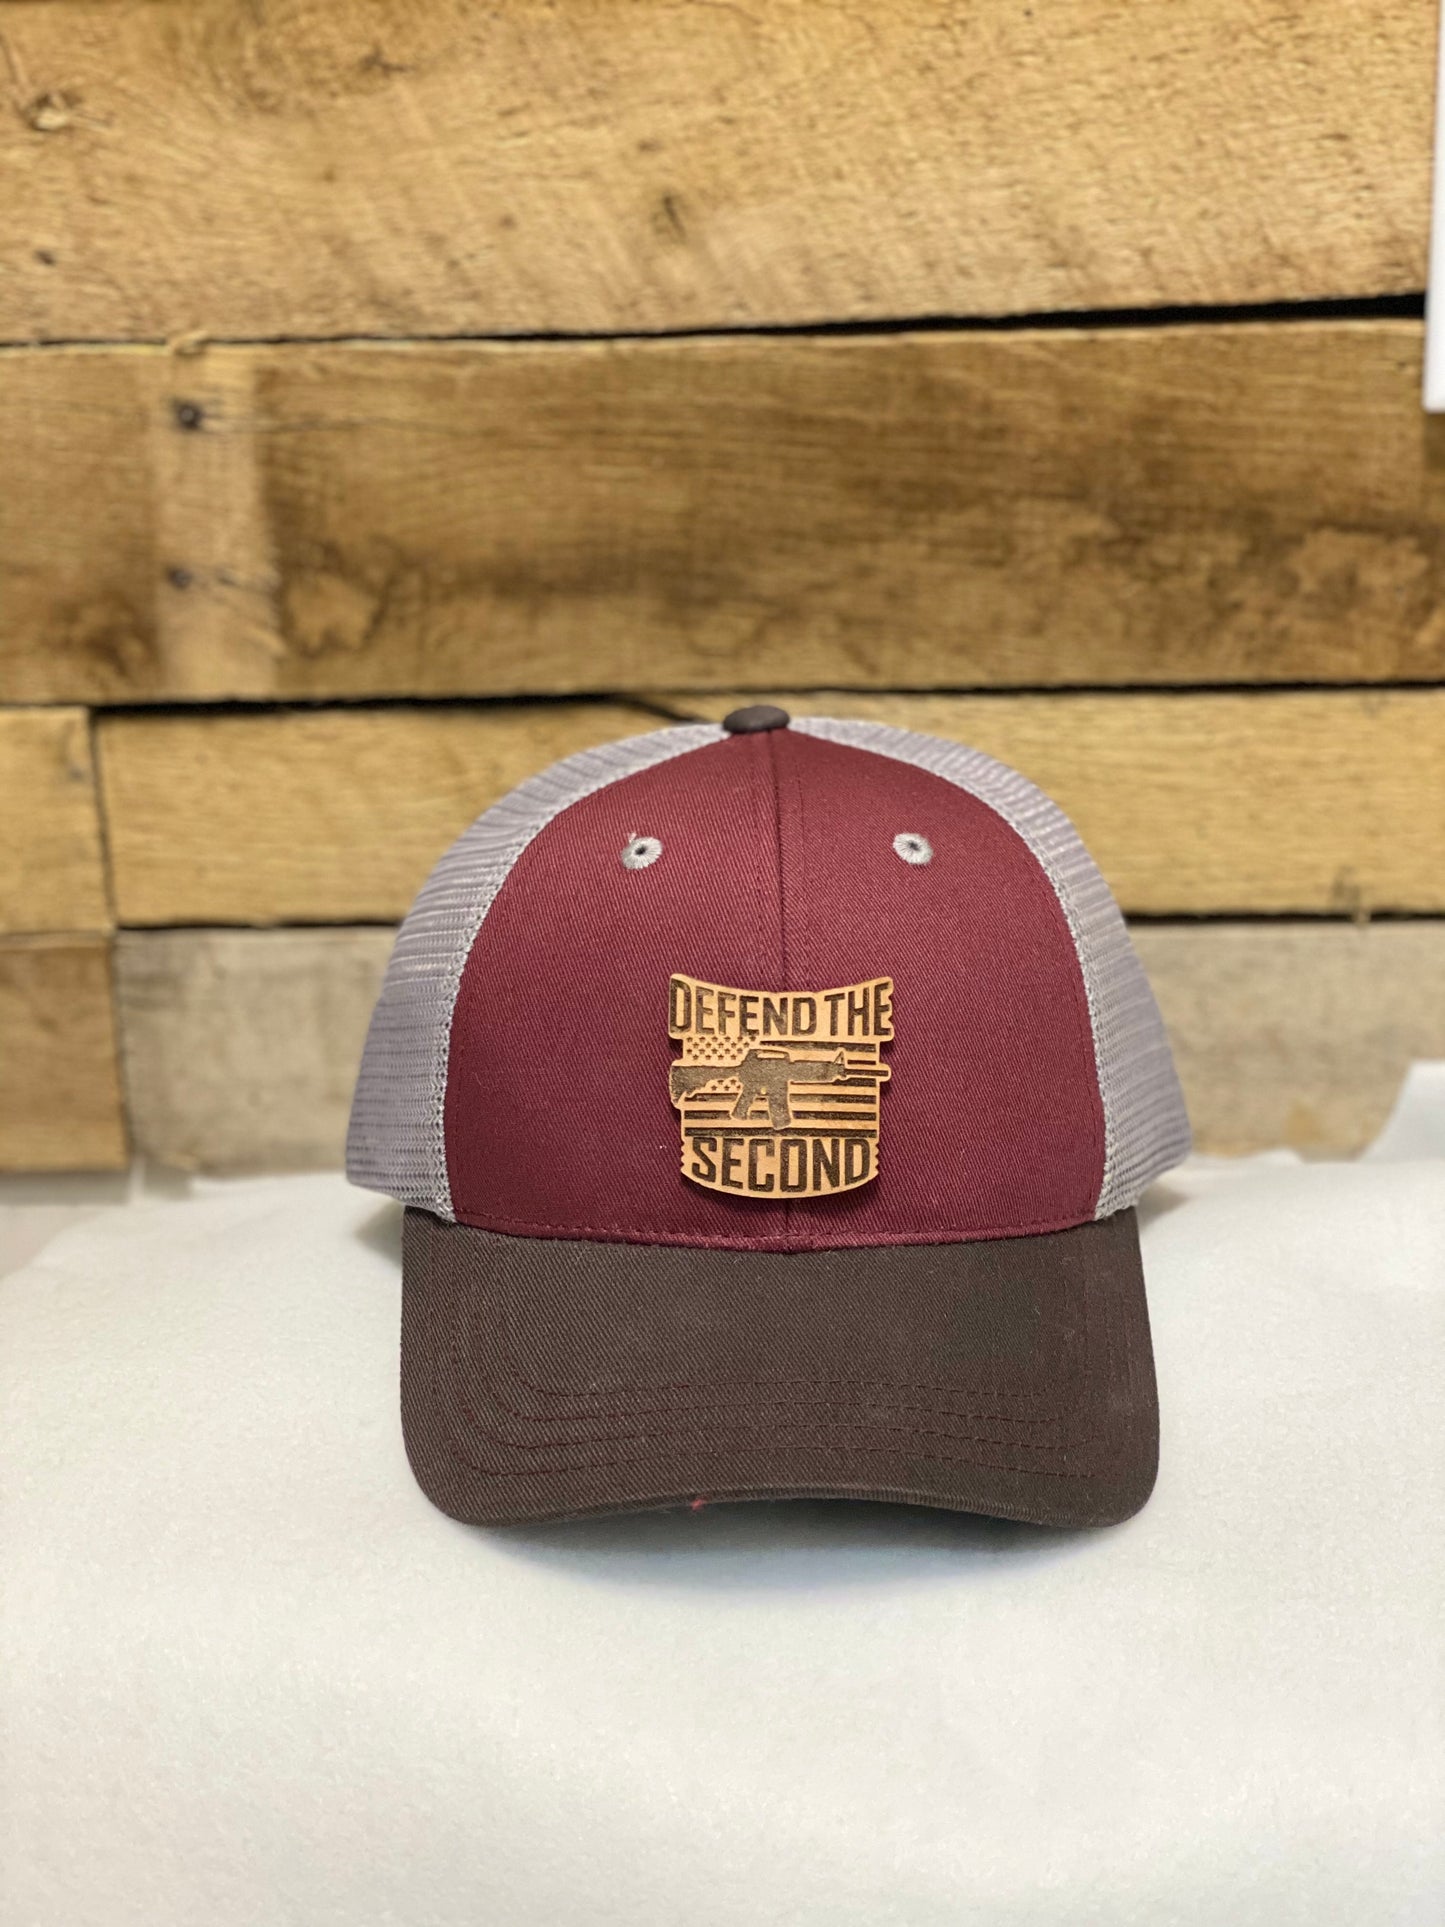 Defend the Second Hat with Leather Patch. Trucker Hat.